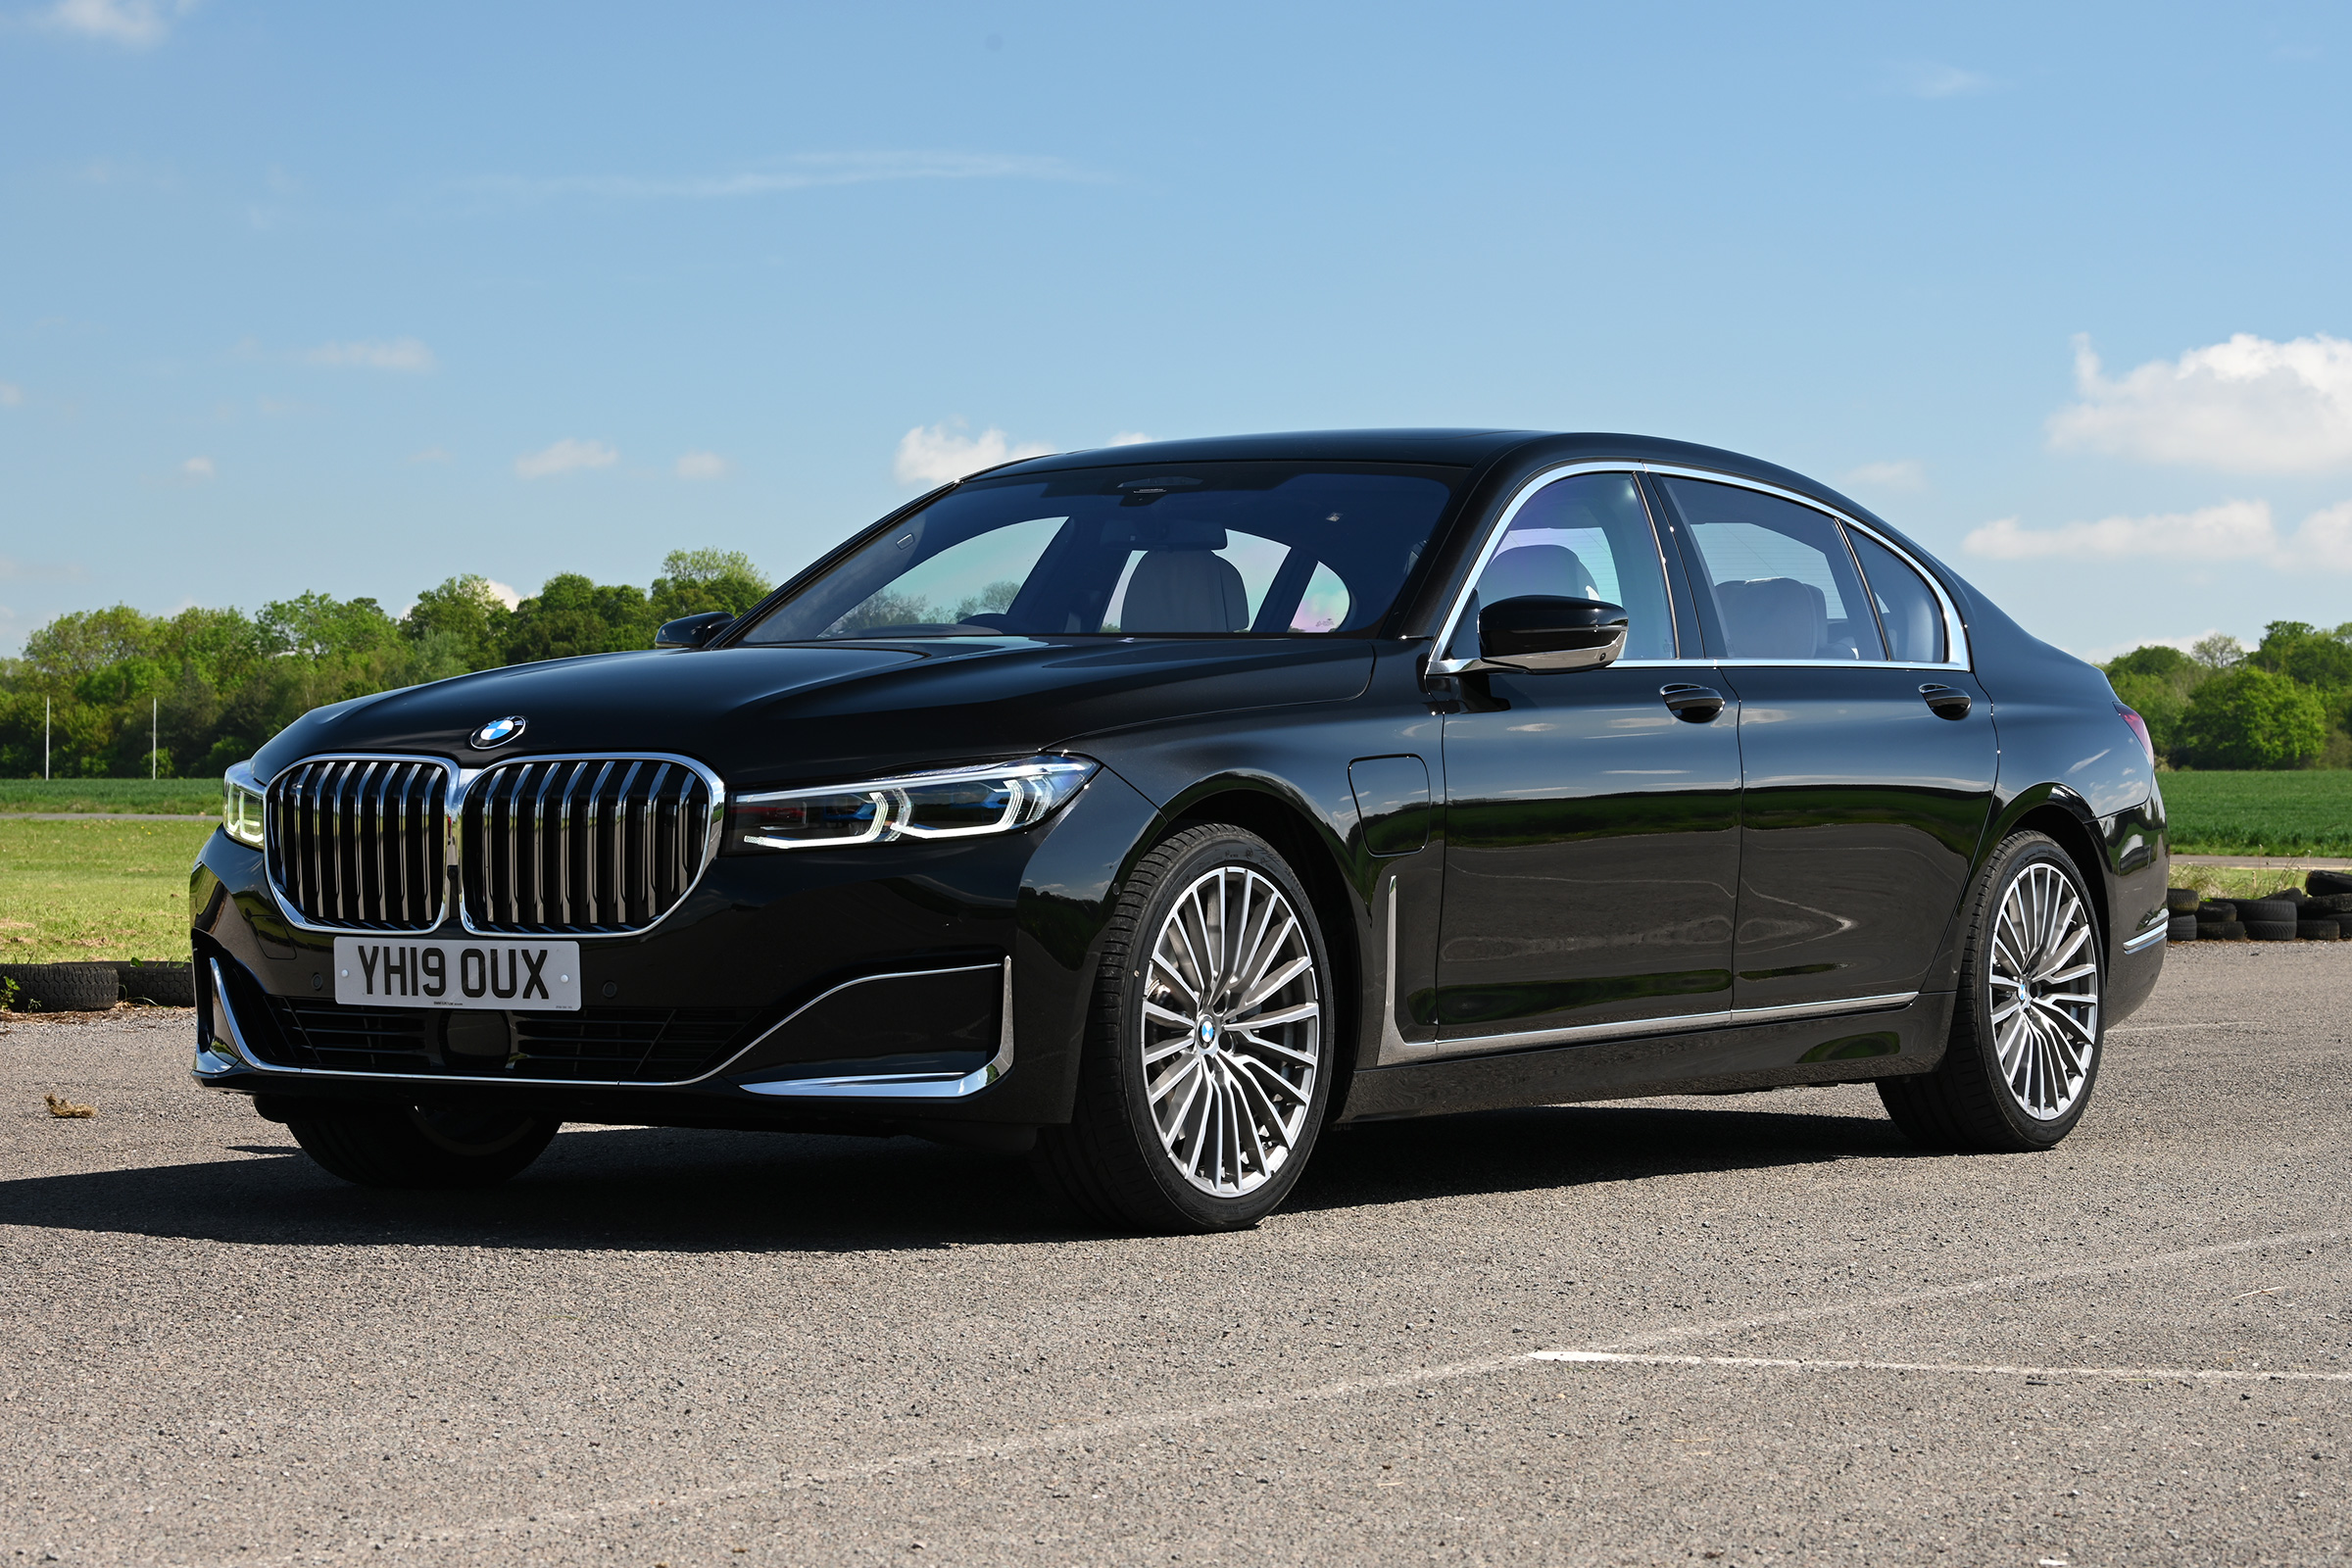 BMW 7 Series hybrid running costs | DrivingElectric